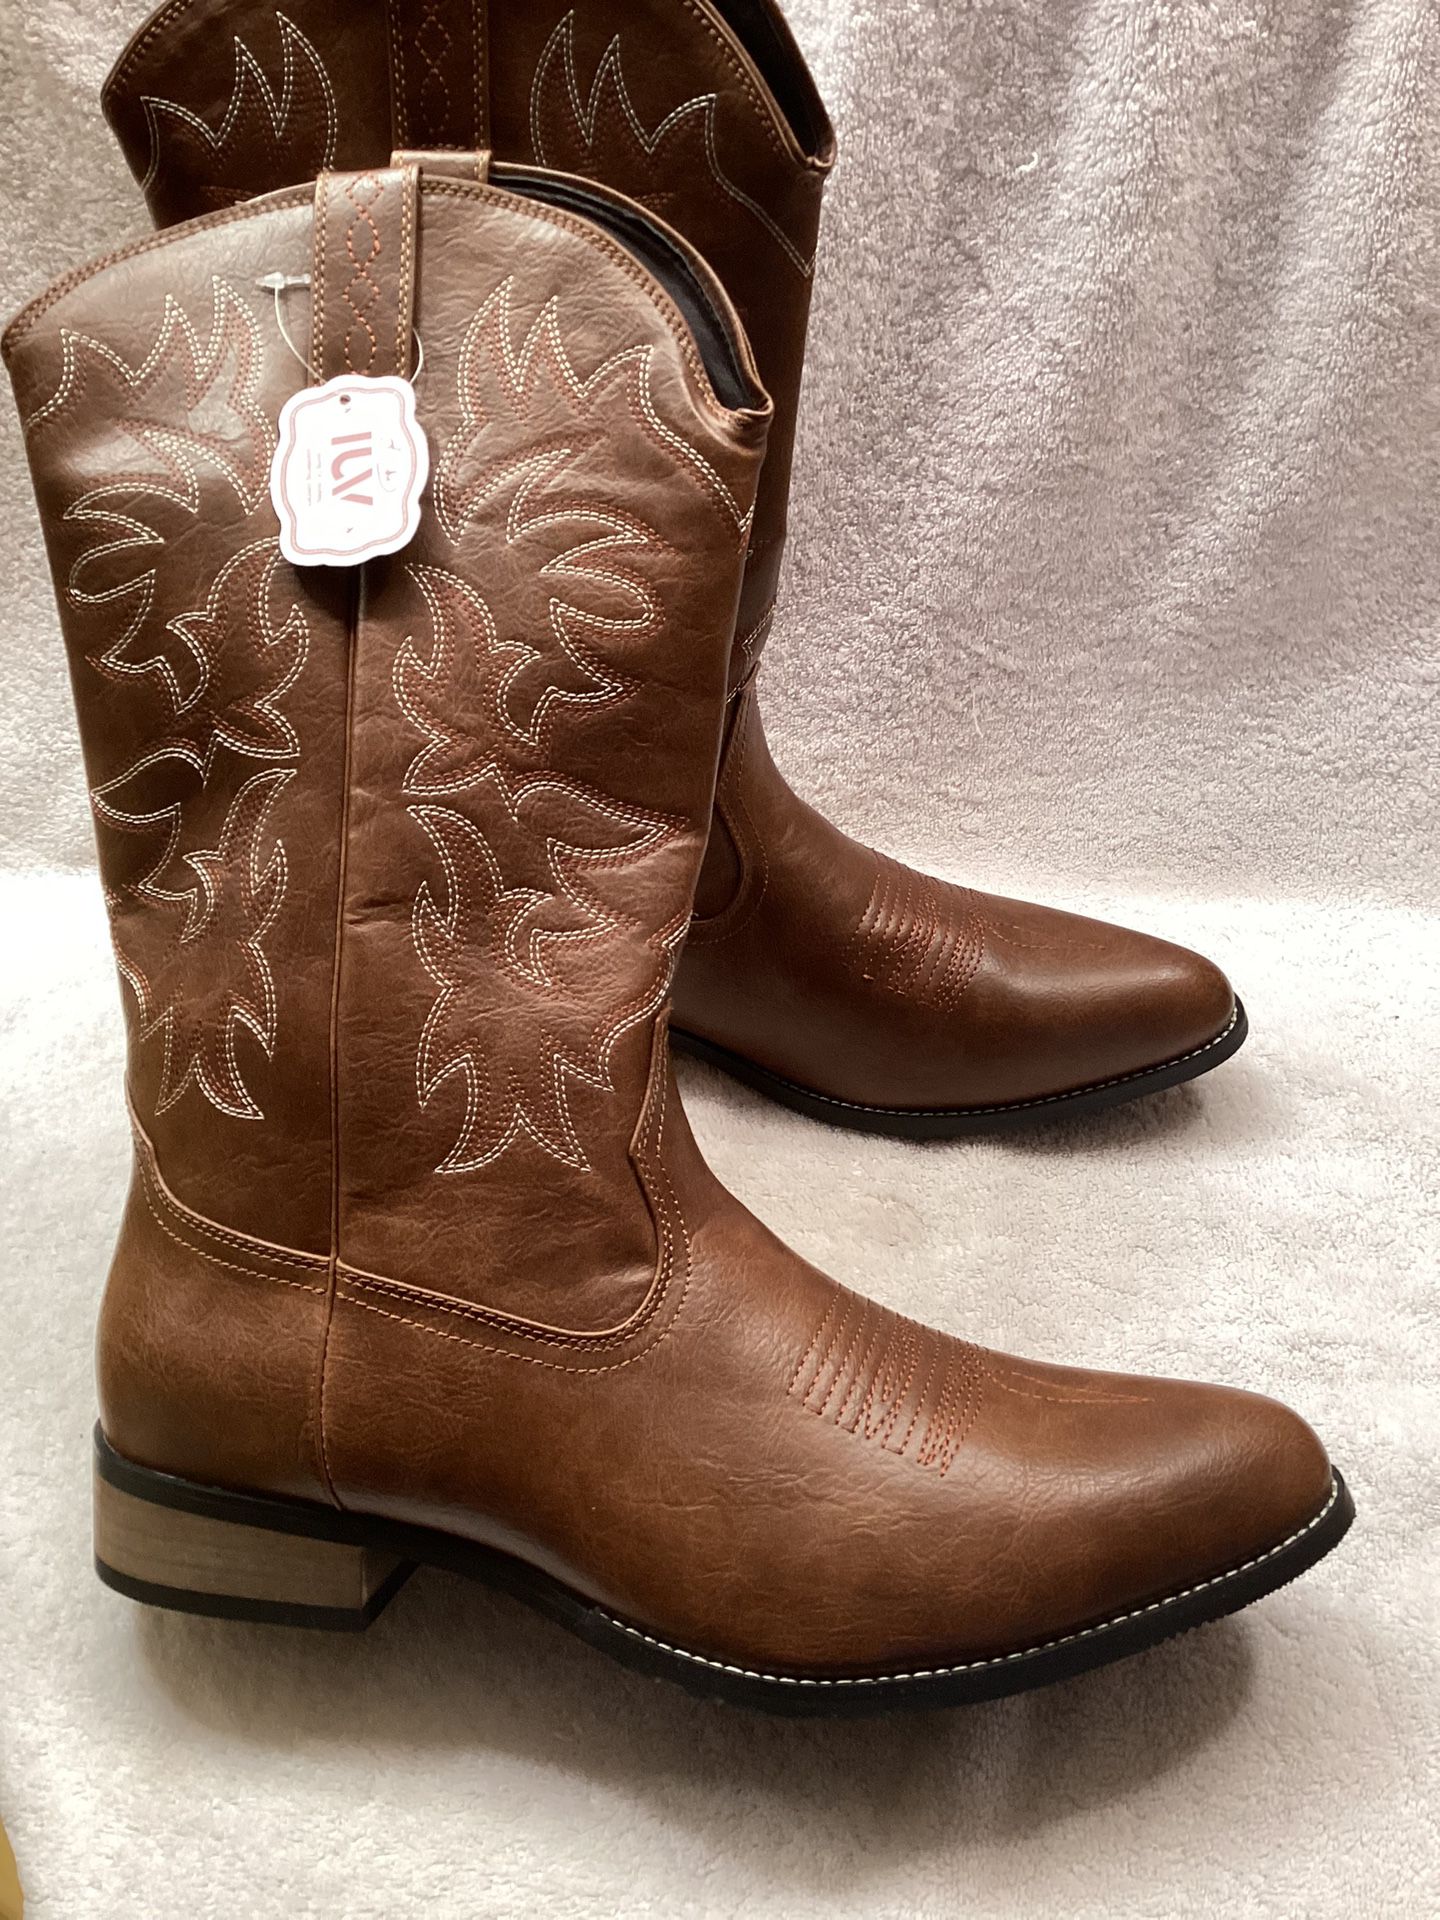 IUV Men’s Mid-calf Pull On Cowboy Western Boots Size 13.5